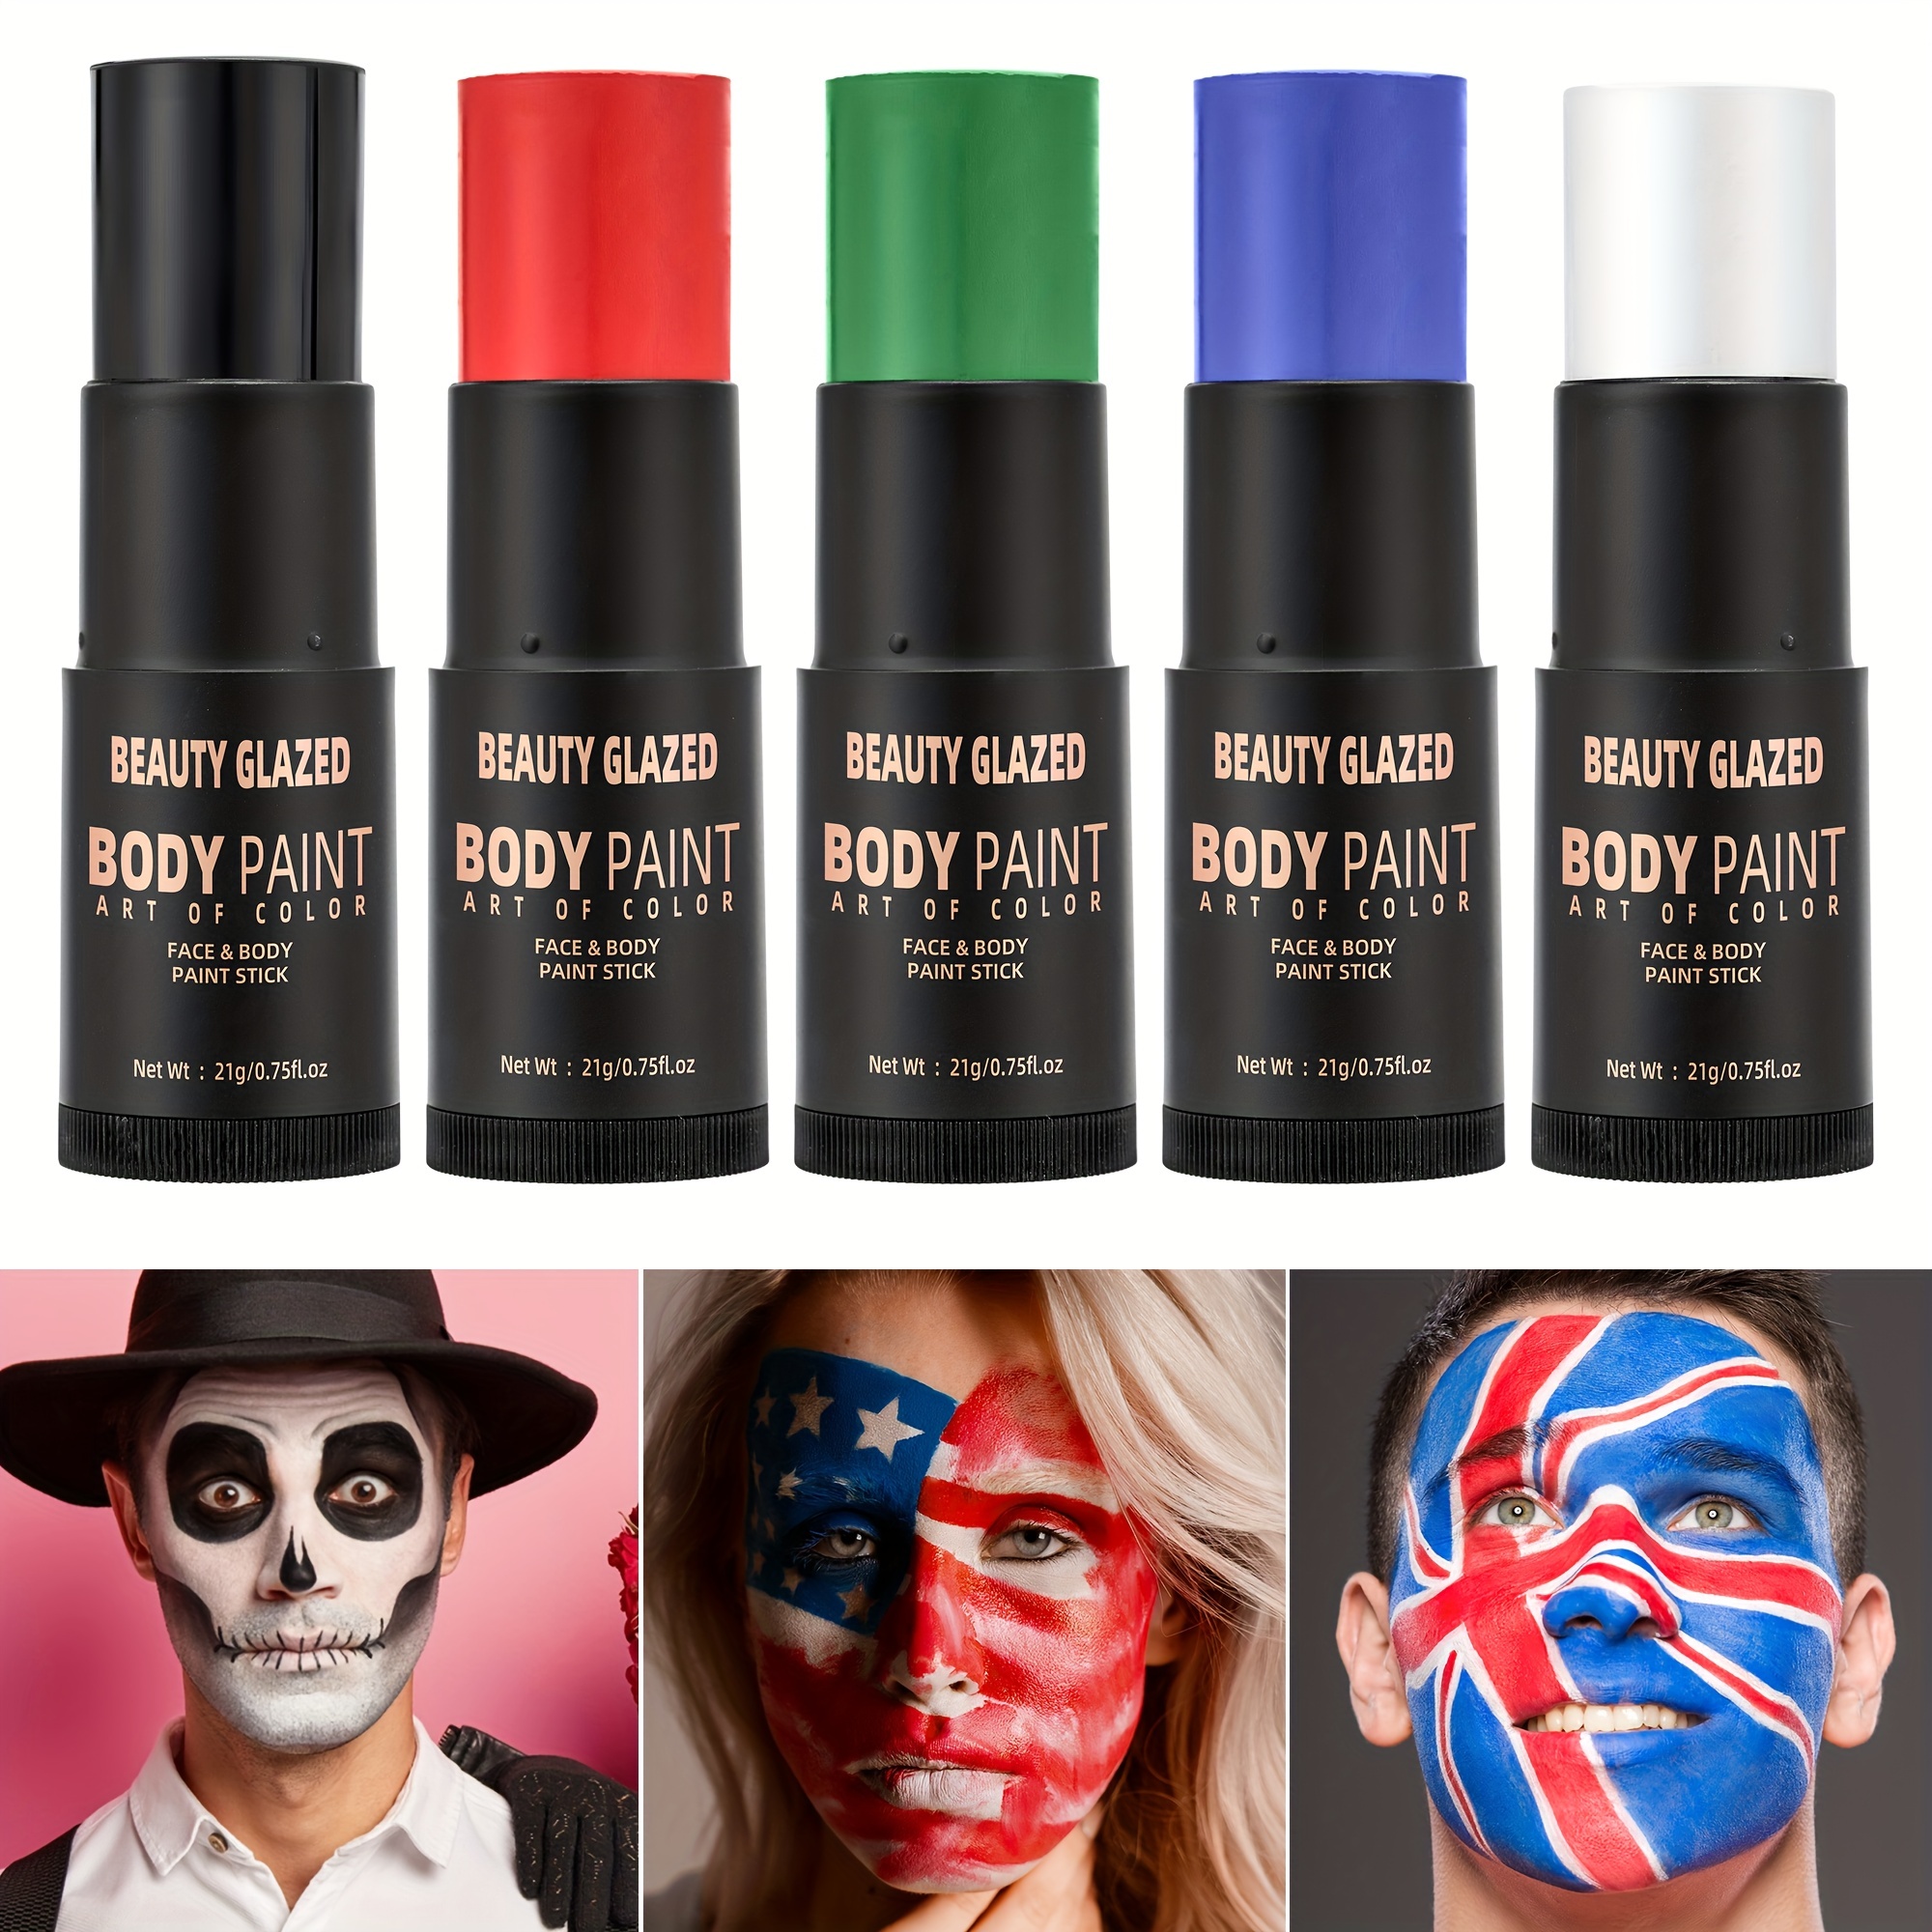 20 Colors Professional Face Body Paint KIT,OIL Face&Body Paint Kit,Including 20 Colors Face Paint/Paint Stick/Brushes/Special Effects Sticker/Fake